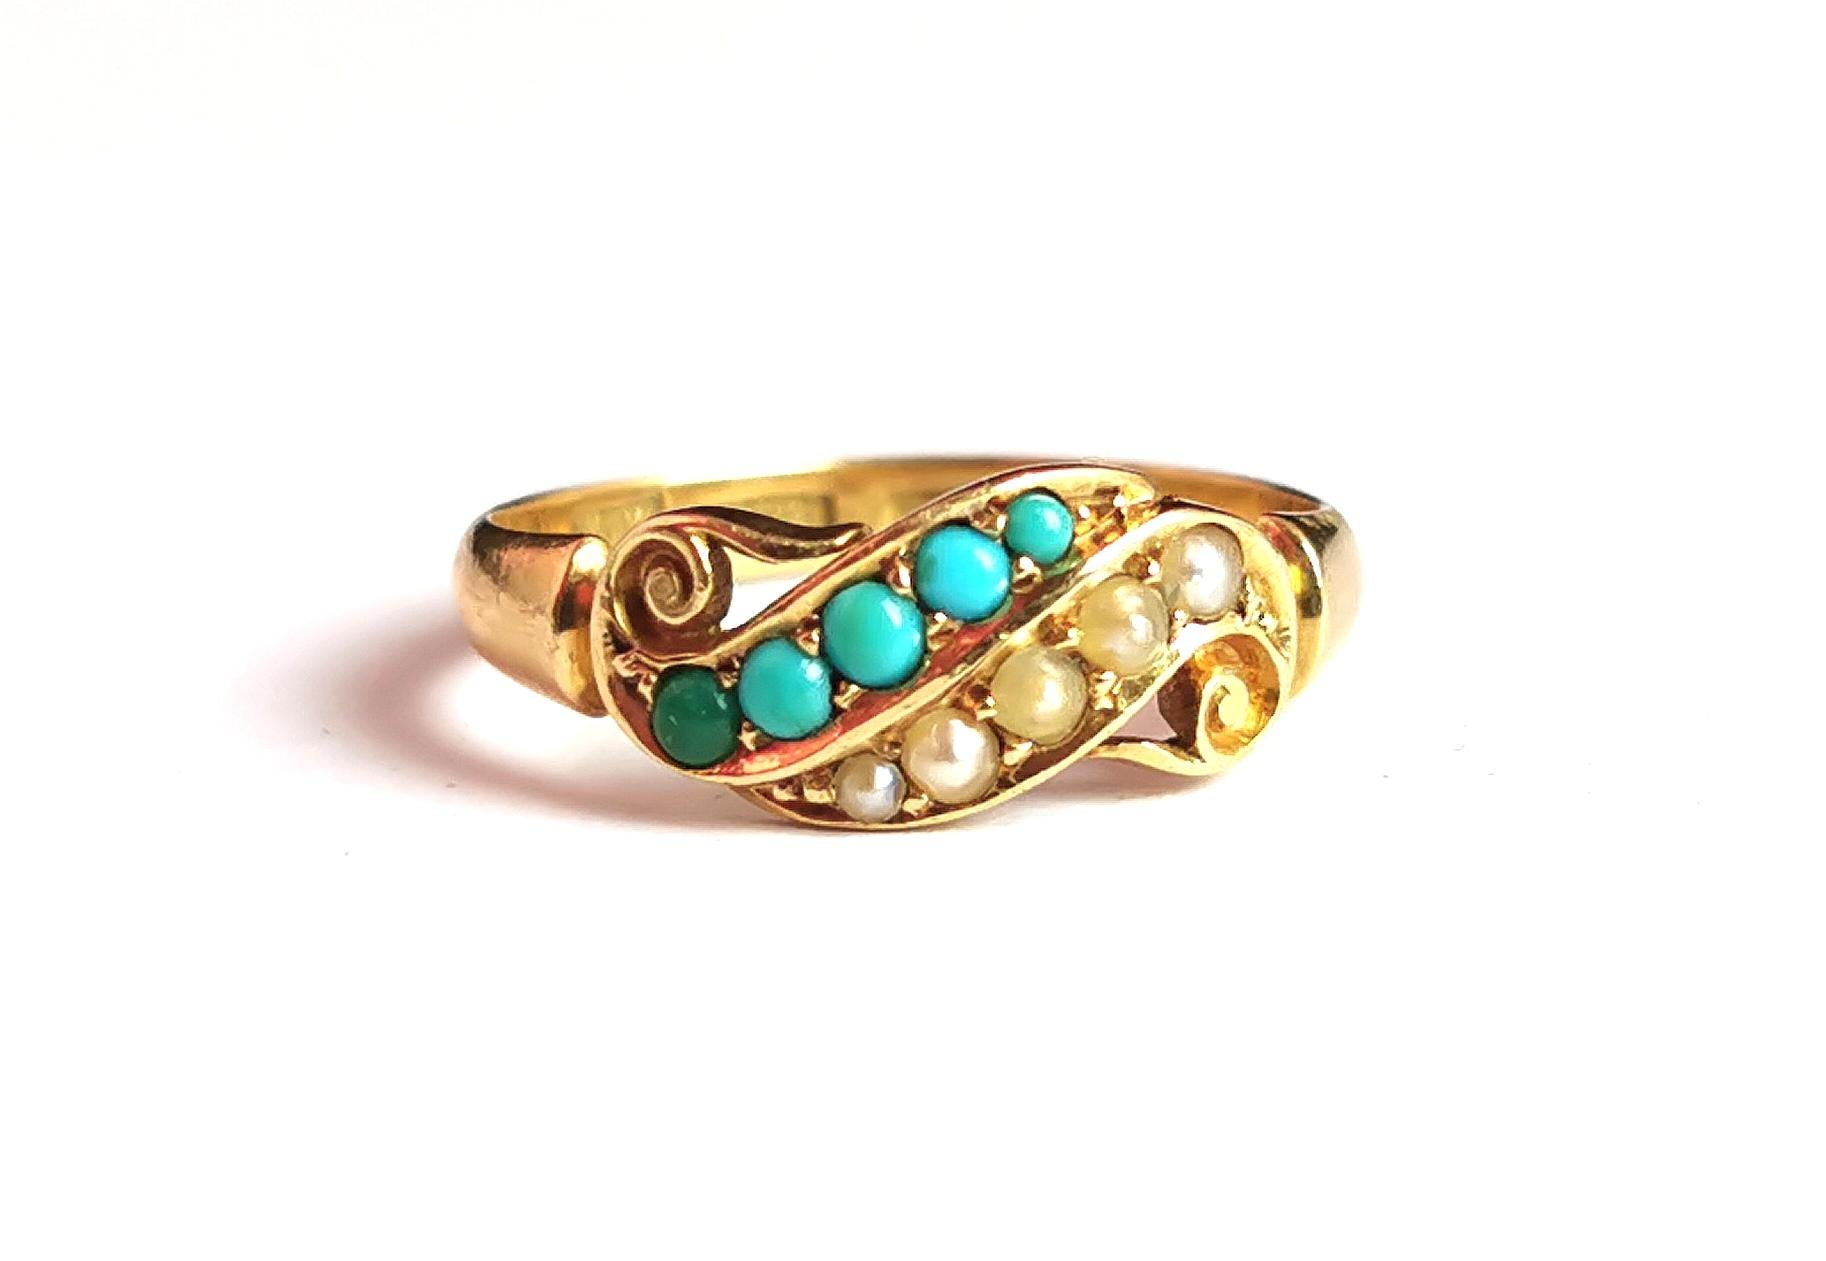 Antique Victorian Turquoise and Pearl Ring, 18k Yellow Gold 9